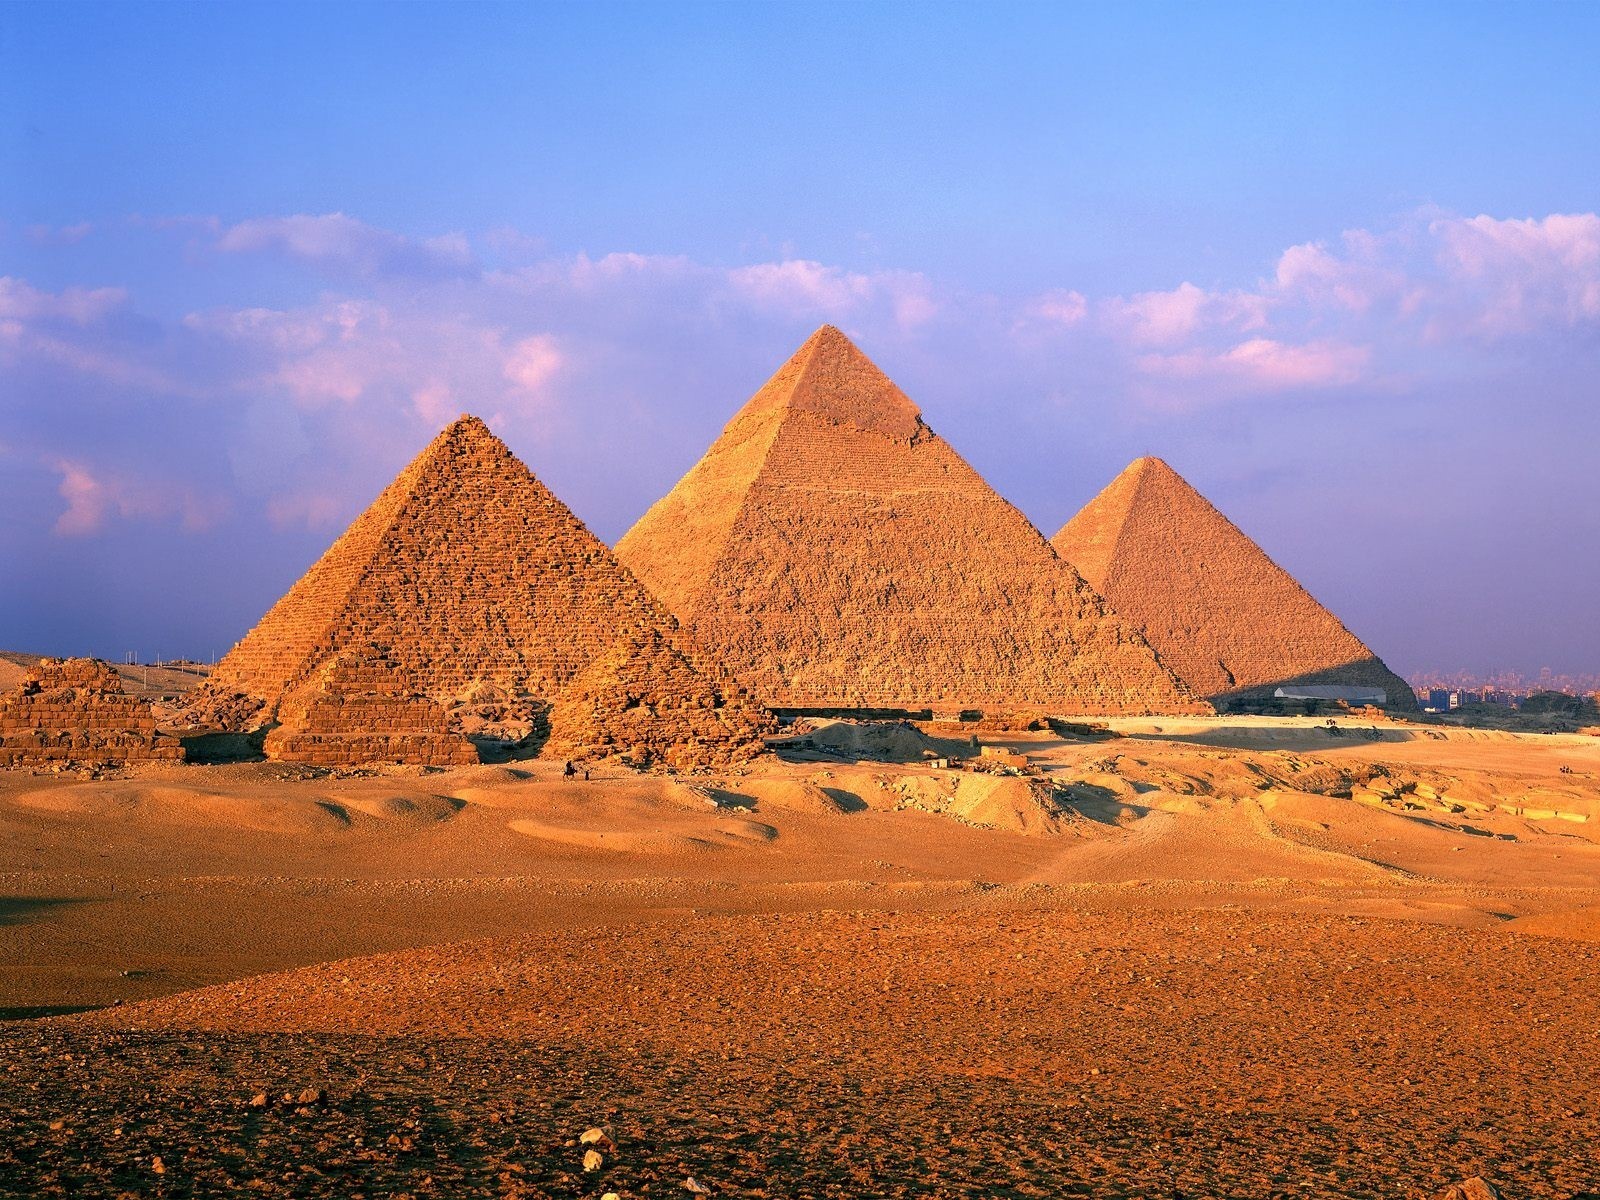 Wonders of World Pyramid of Giza in Egypt Wallpaper | HD Wallpapers